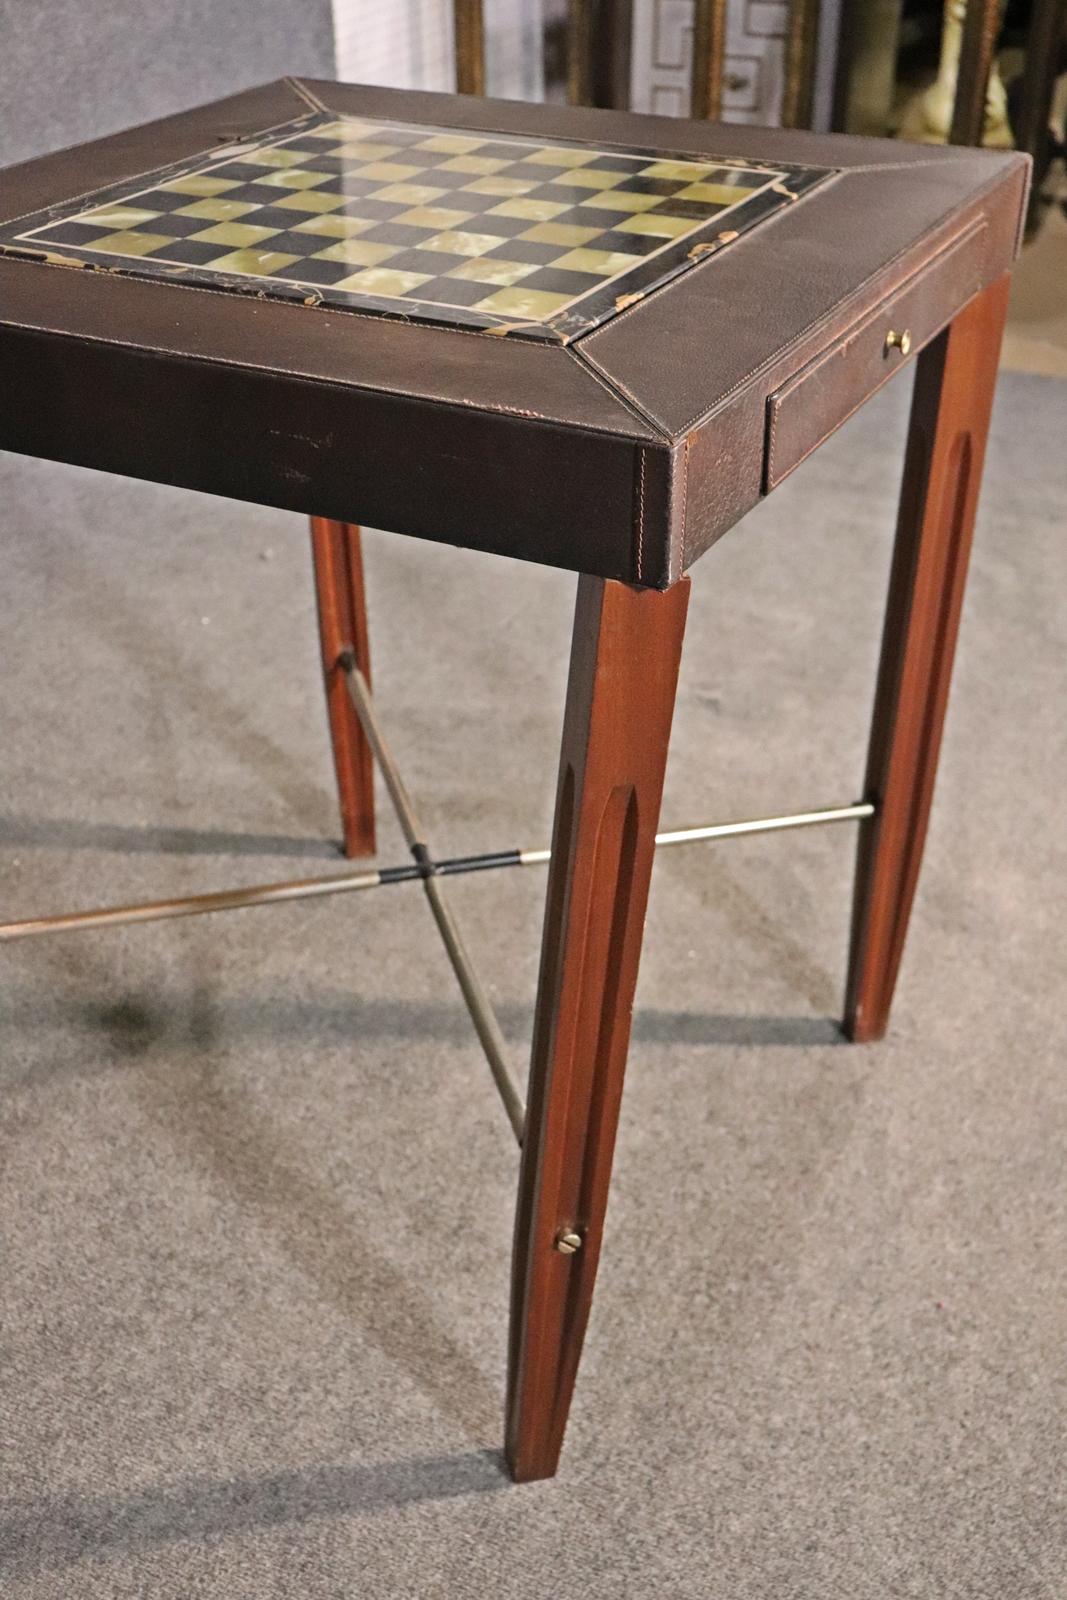 Exceptional Quality Aldo Tura Style Onyx and Leather Games Tables with Pieces 2